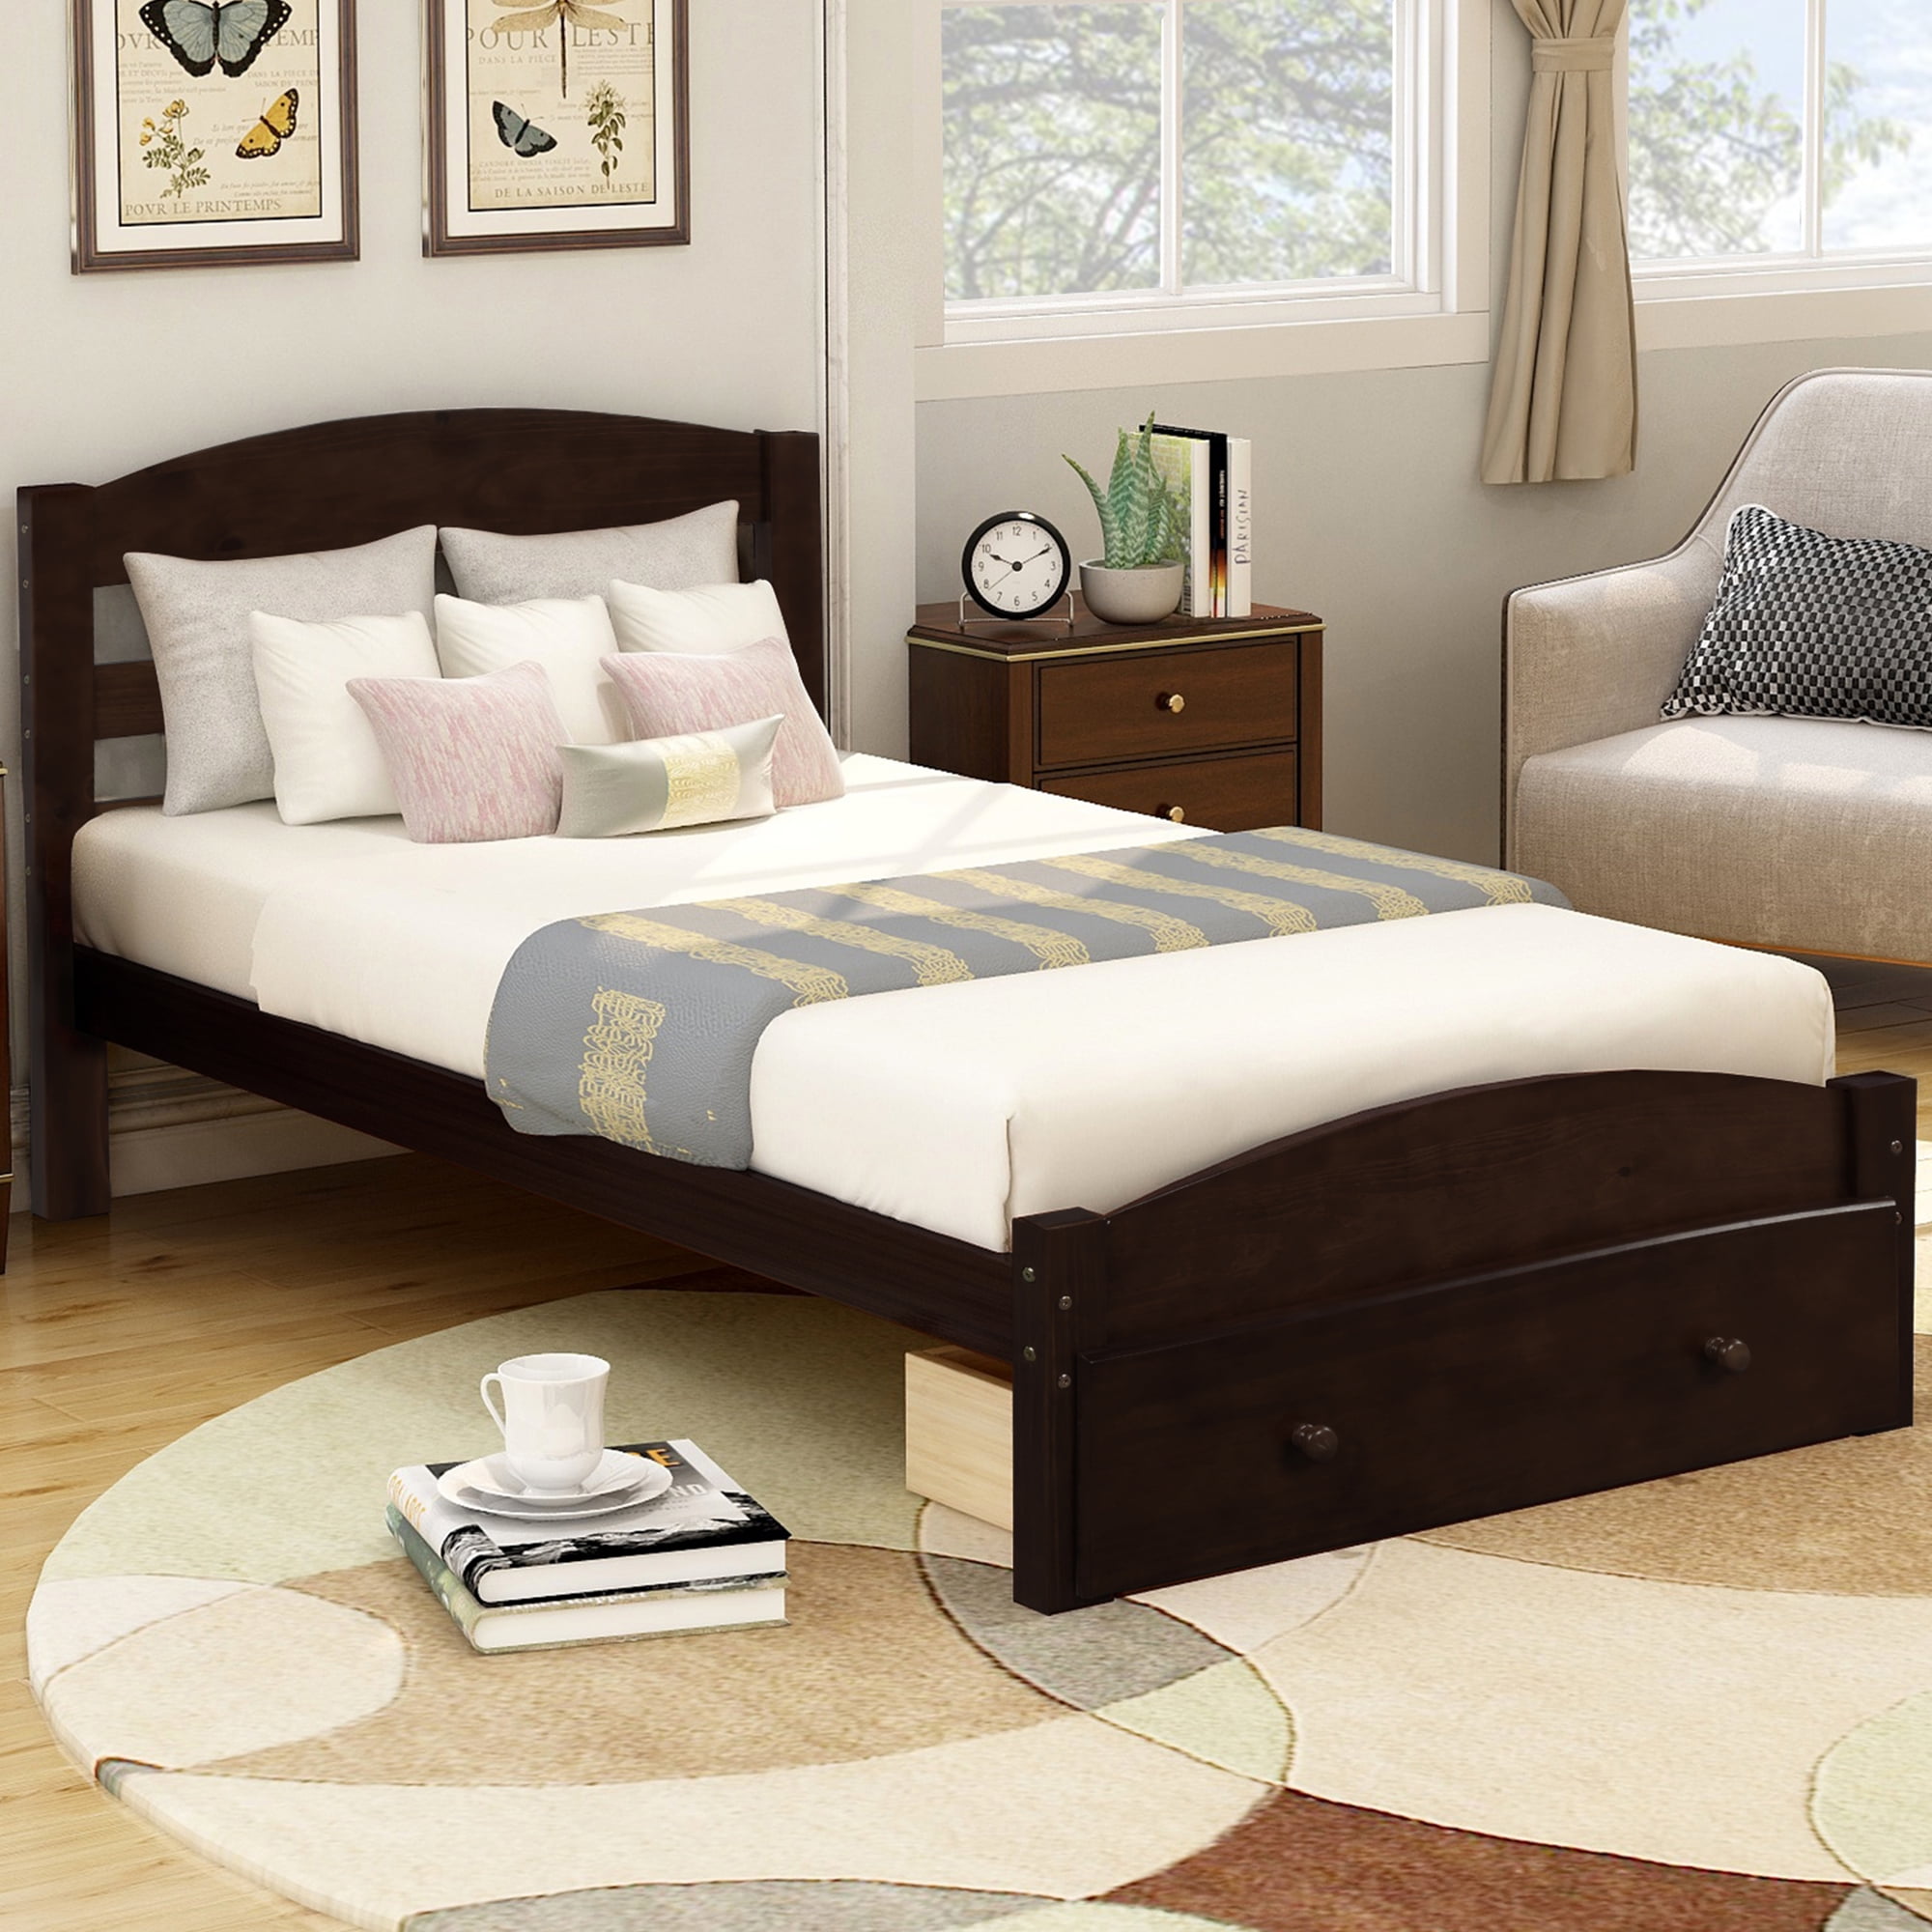 Twin Size Platform Bed with Headboard Bedroom Wooden Slatted Bed frame 